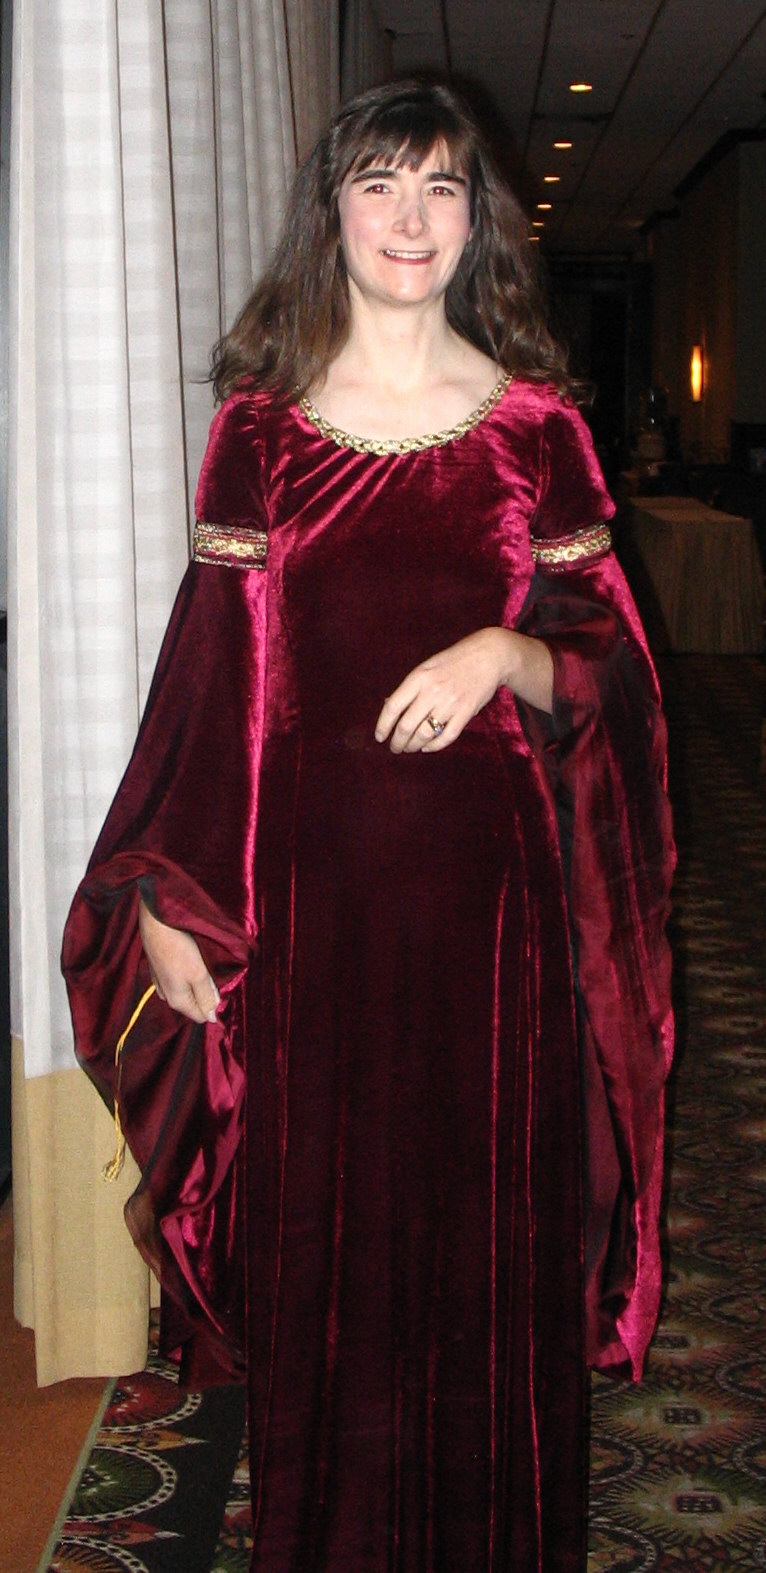  Arwen's Cranberry Dress by Jen from the Masquerade Lab